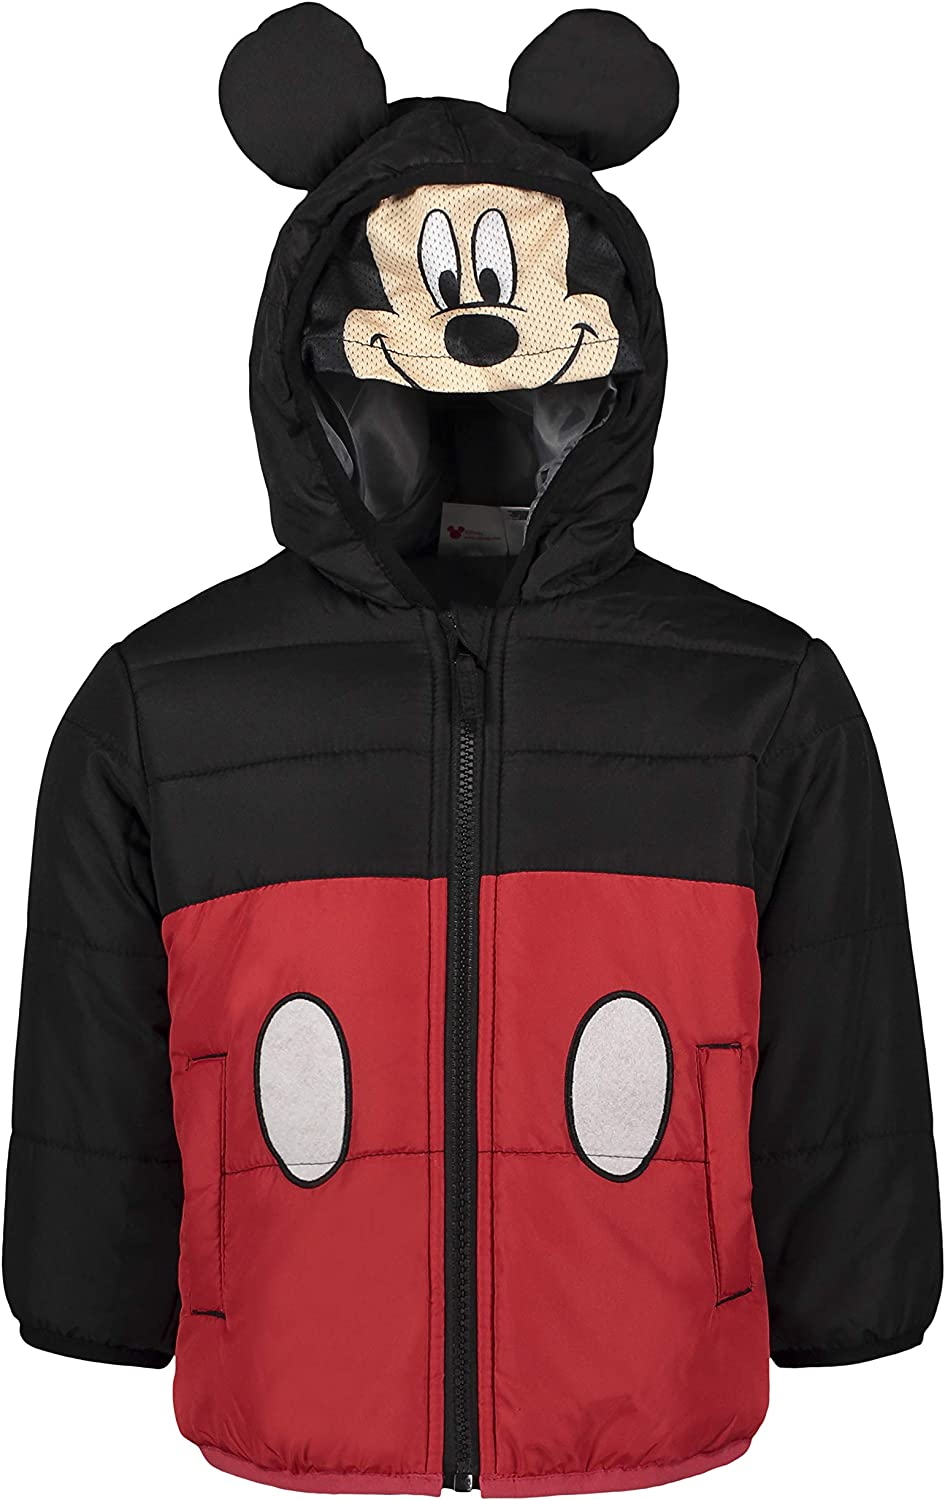 Disney Toddler Boys' Mickey Mouse Hooded Puffer Jacket with Mask, Sizes 2T-4T